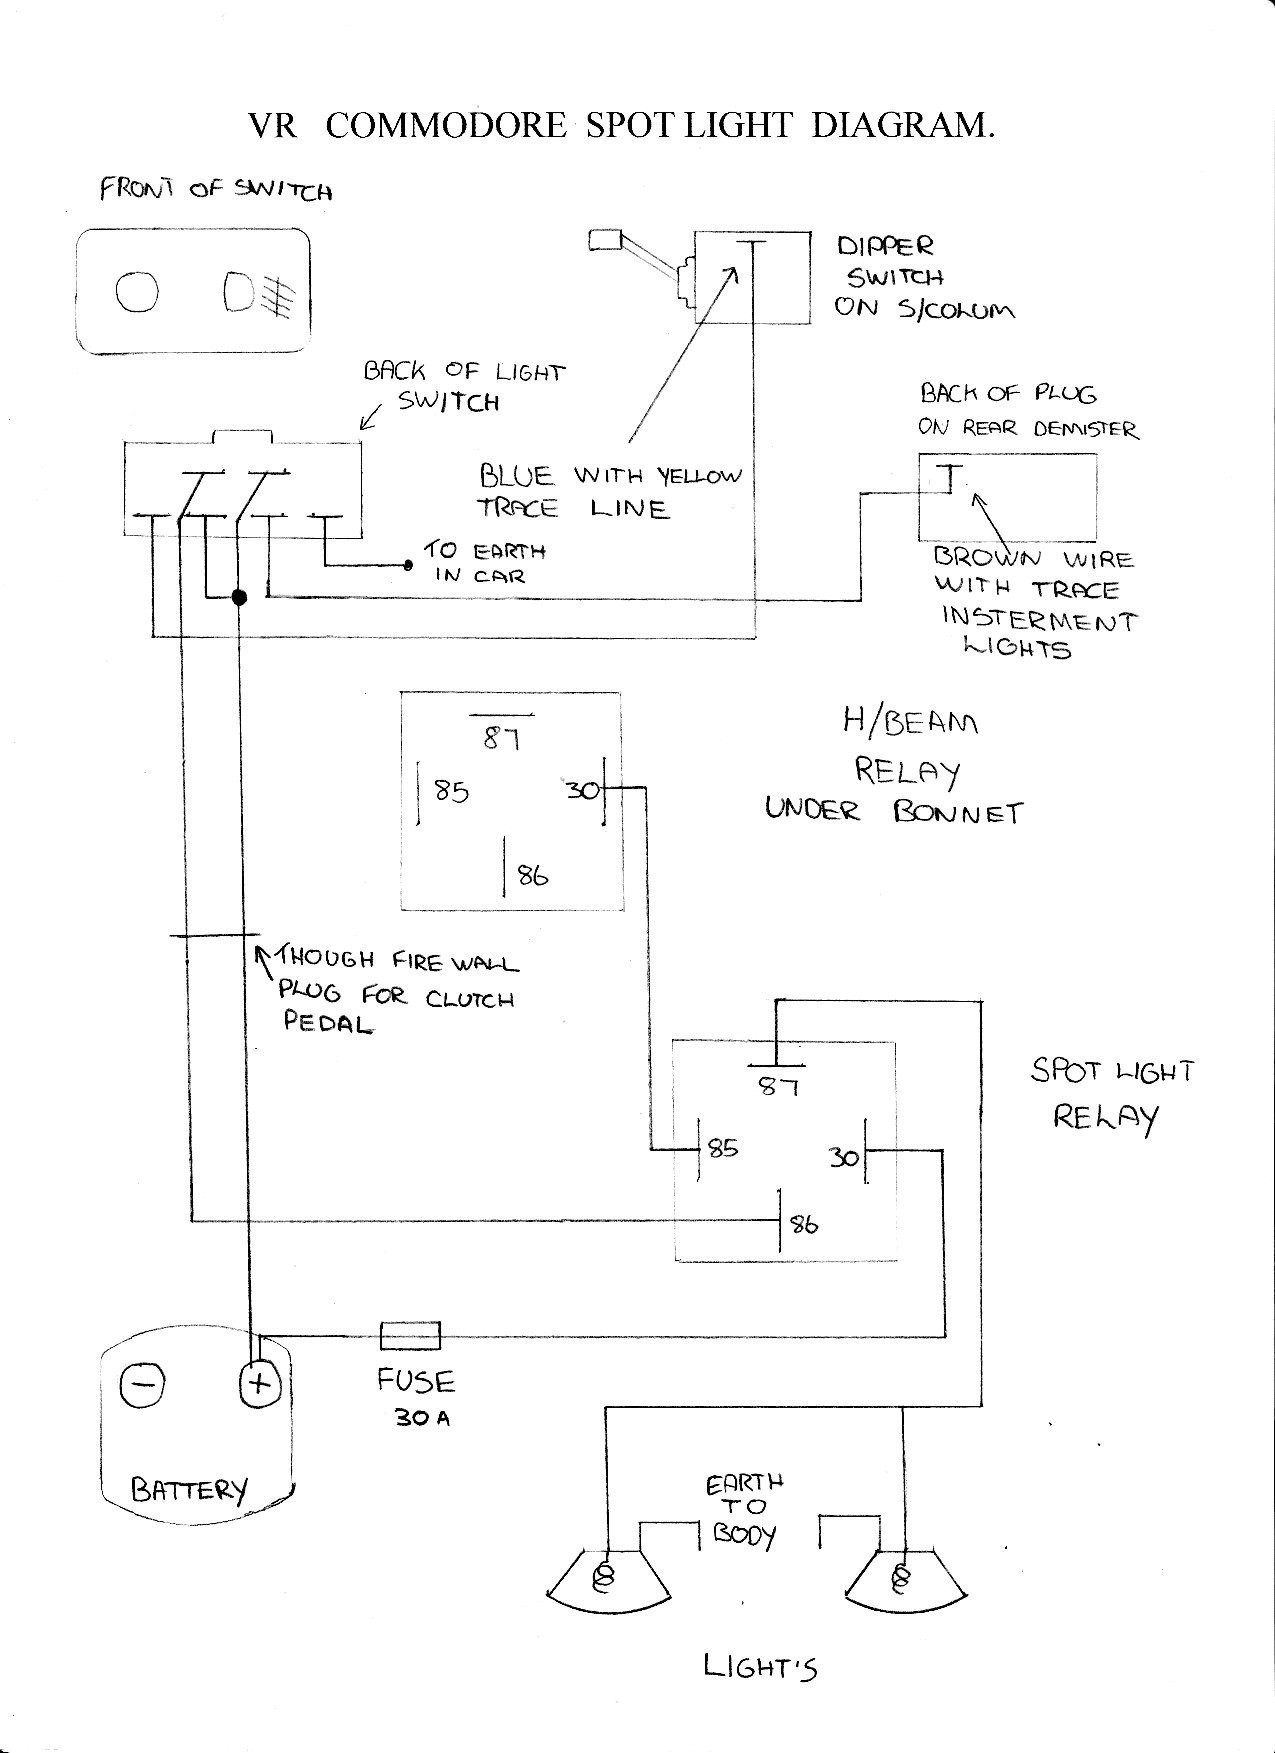 Fog Light Wiring Diagram with Relay New Wiring Diagram for A Relay for Fog Lights Inspirationa